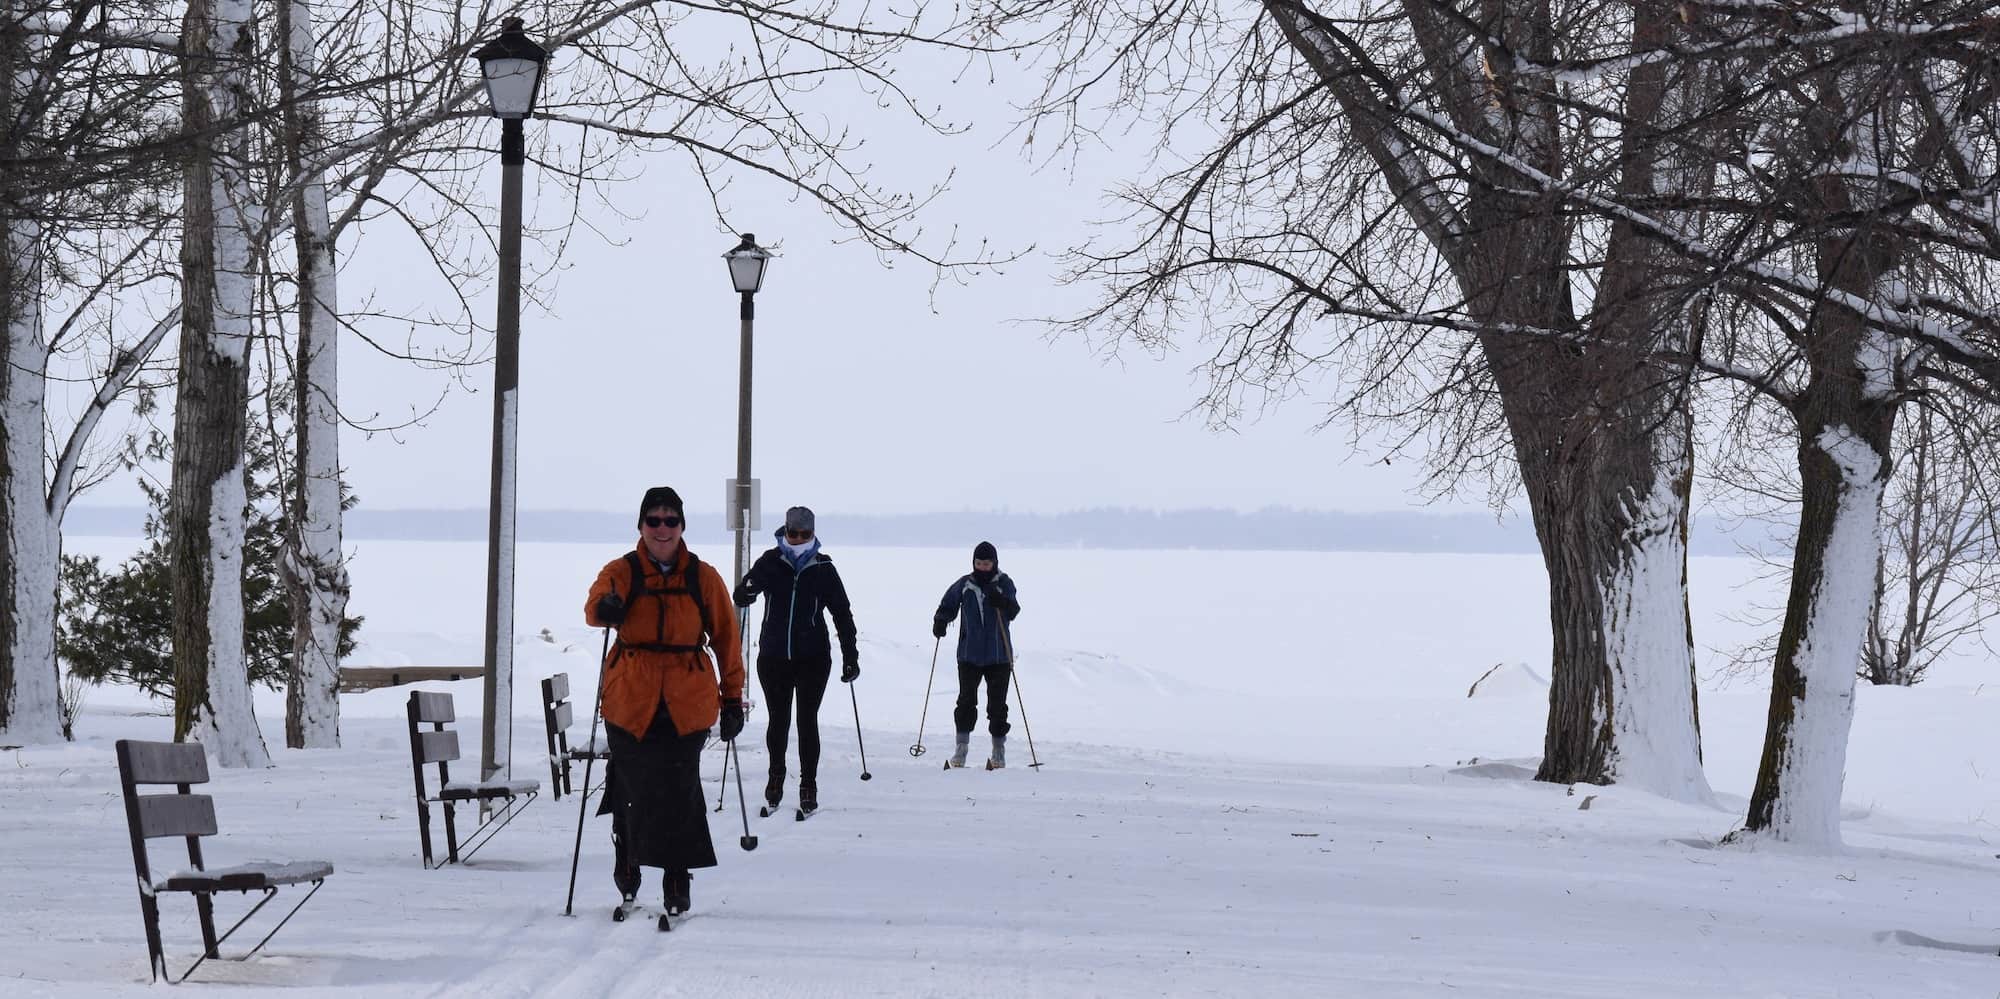 Cross country skiing at Britannia Winter Trail